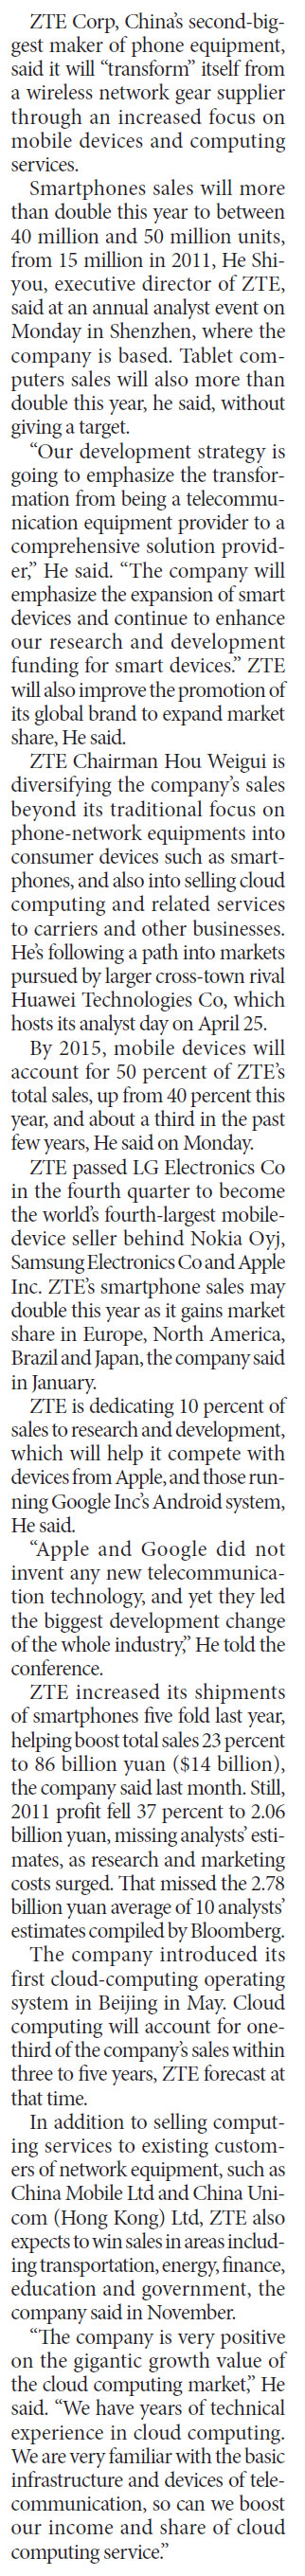 ZTE to focus on smart devices